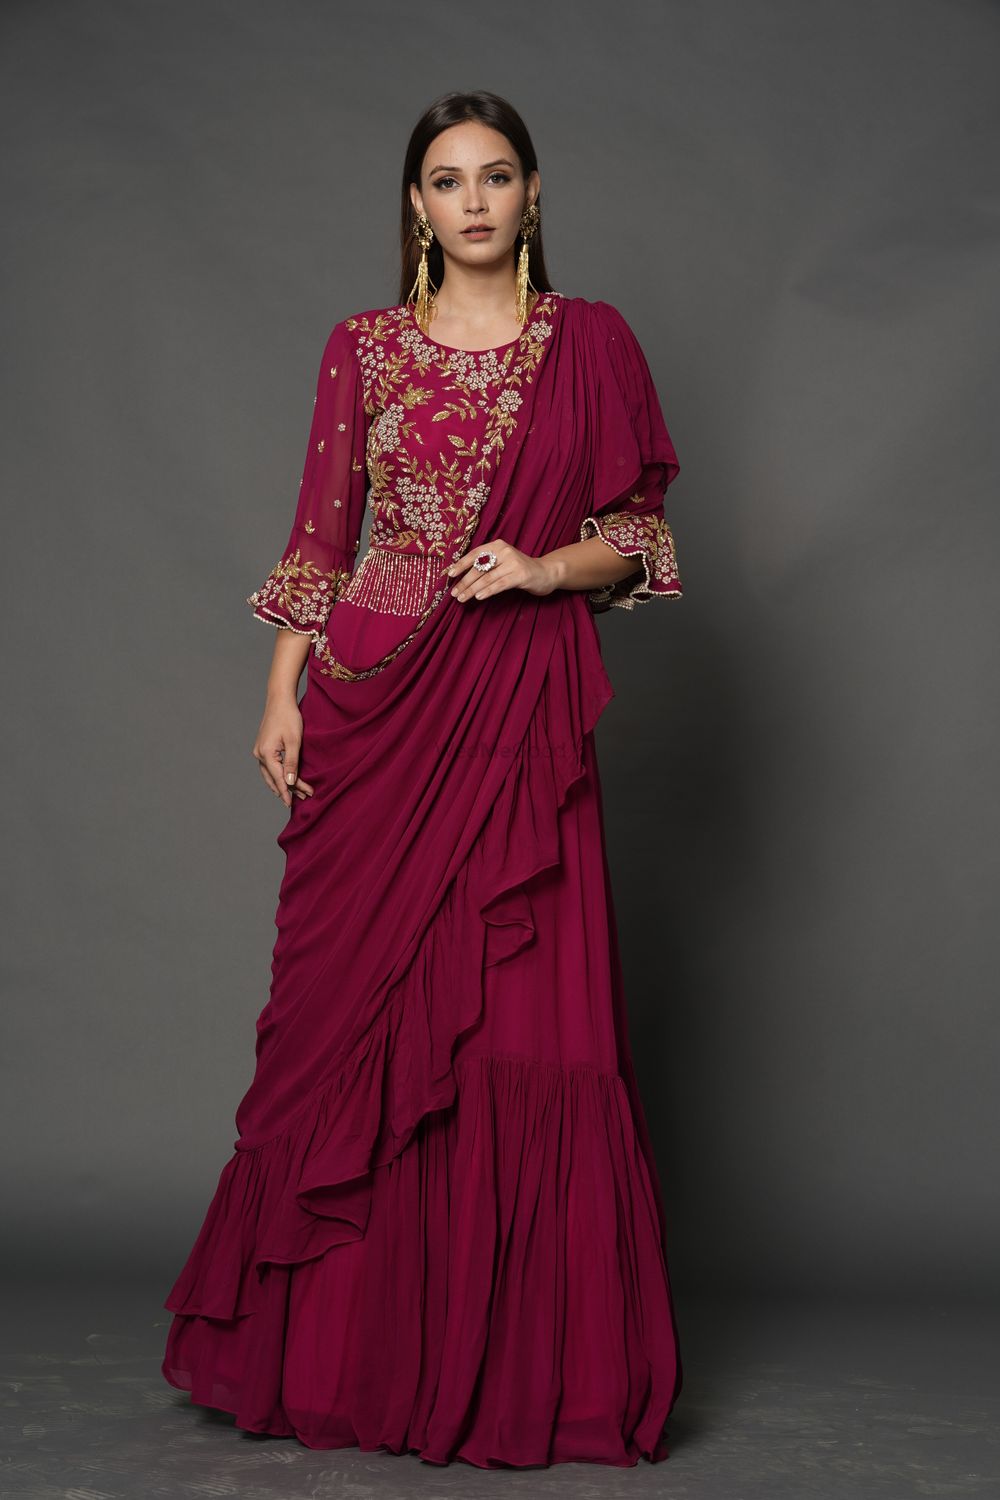 Photo of A dark pink saree gown with an embellished bodice.